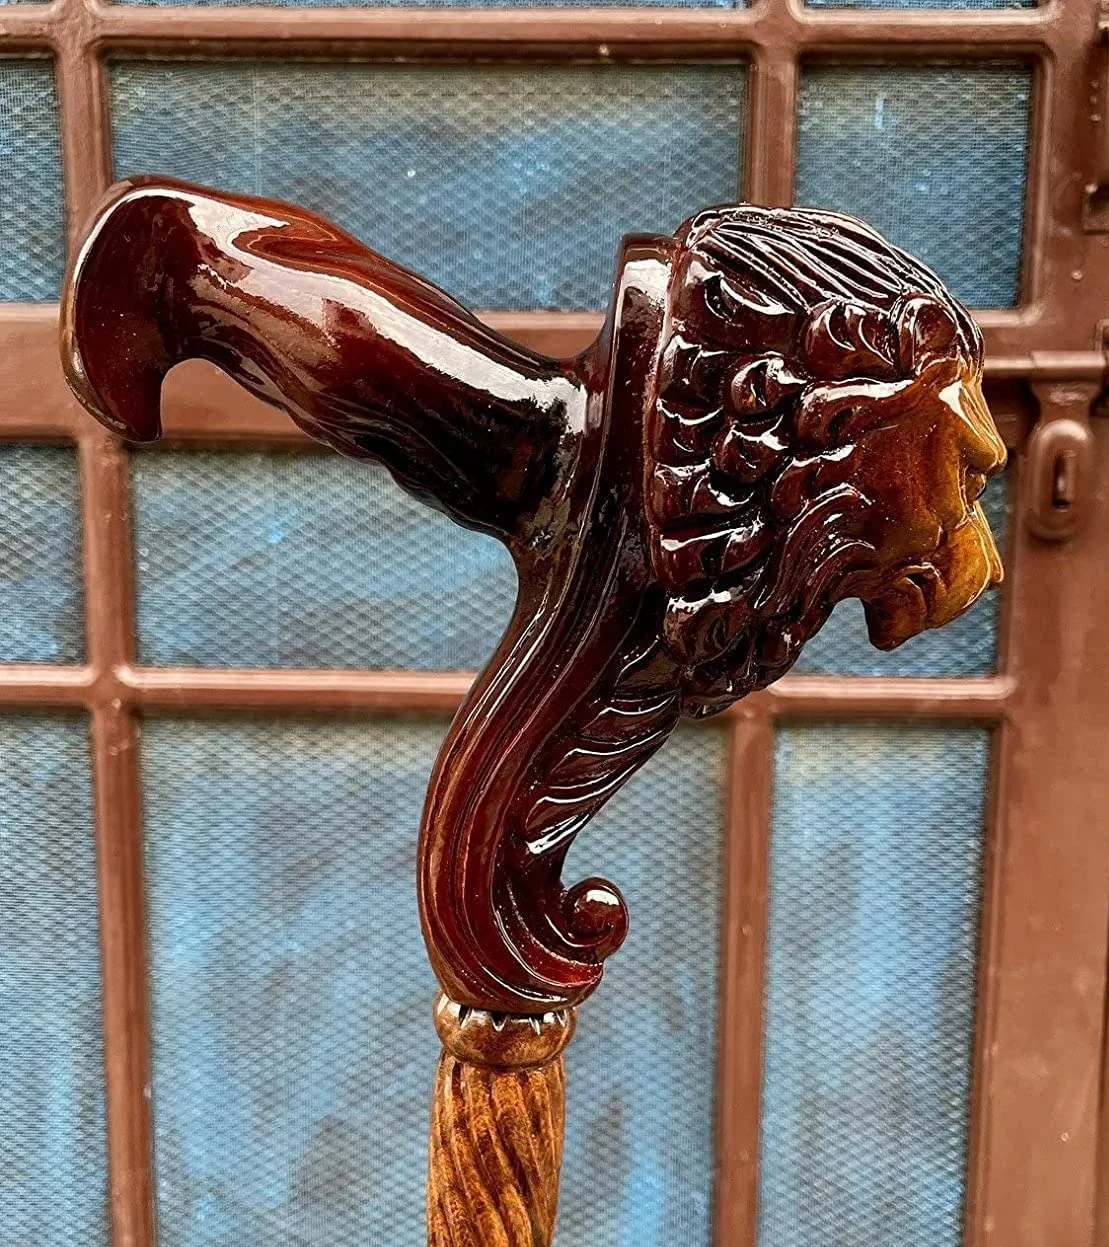 Lion Head Wood Carved Walking Stick Ergonomic Palm Grip Handle 37 Inch Wooden Walking Cane For 2104